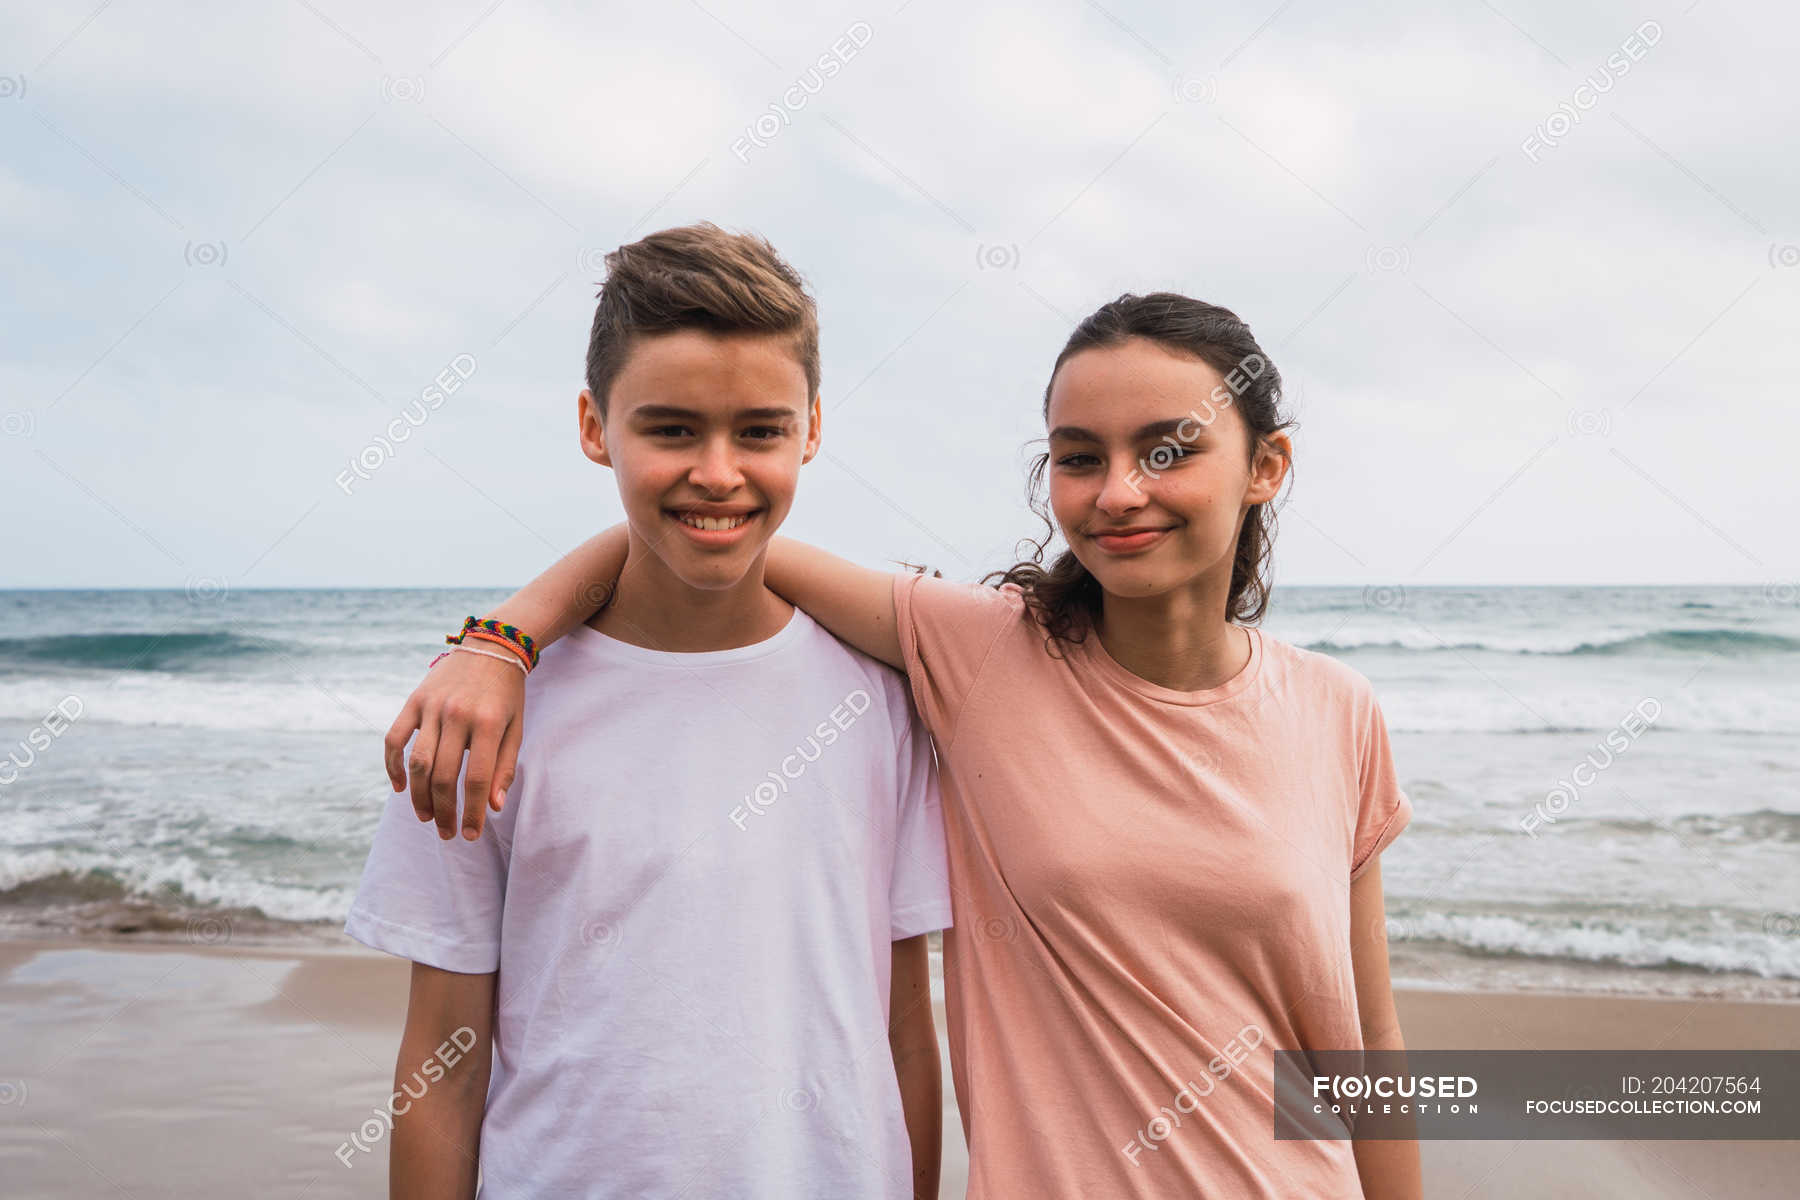 Portrait Of Smiling Teen Girl And Boy Standing On Beach Female Daytime Stock Photo 204207564